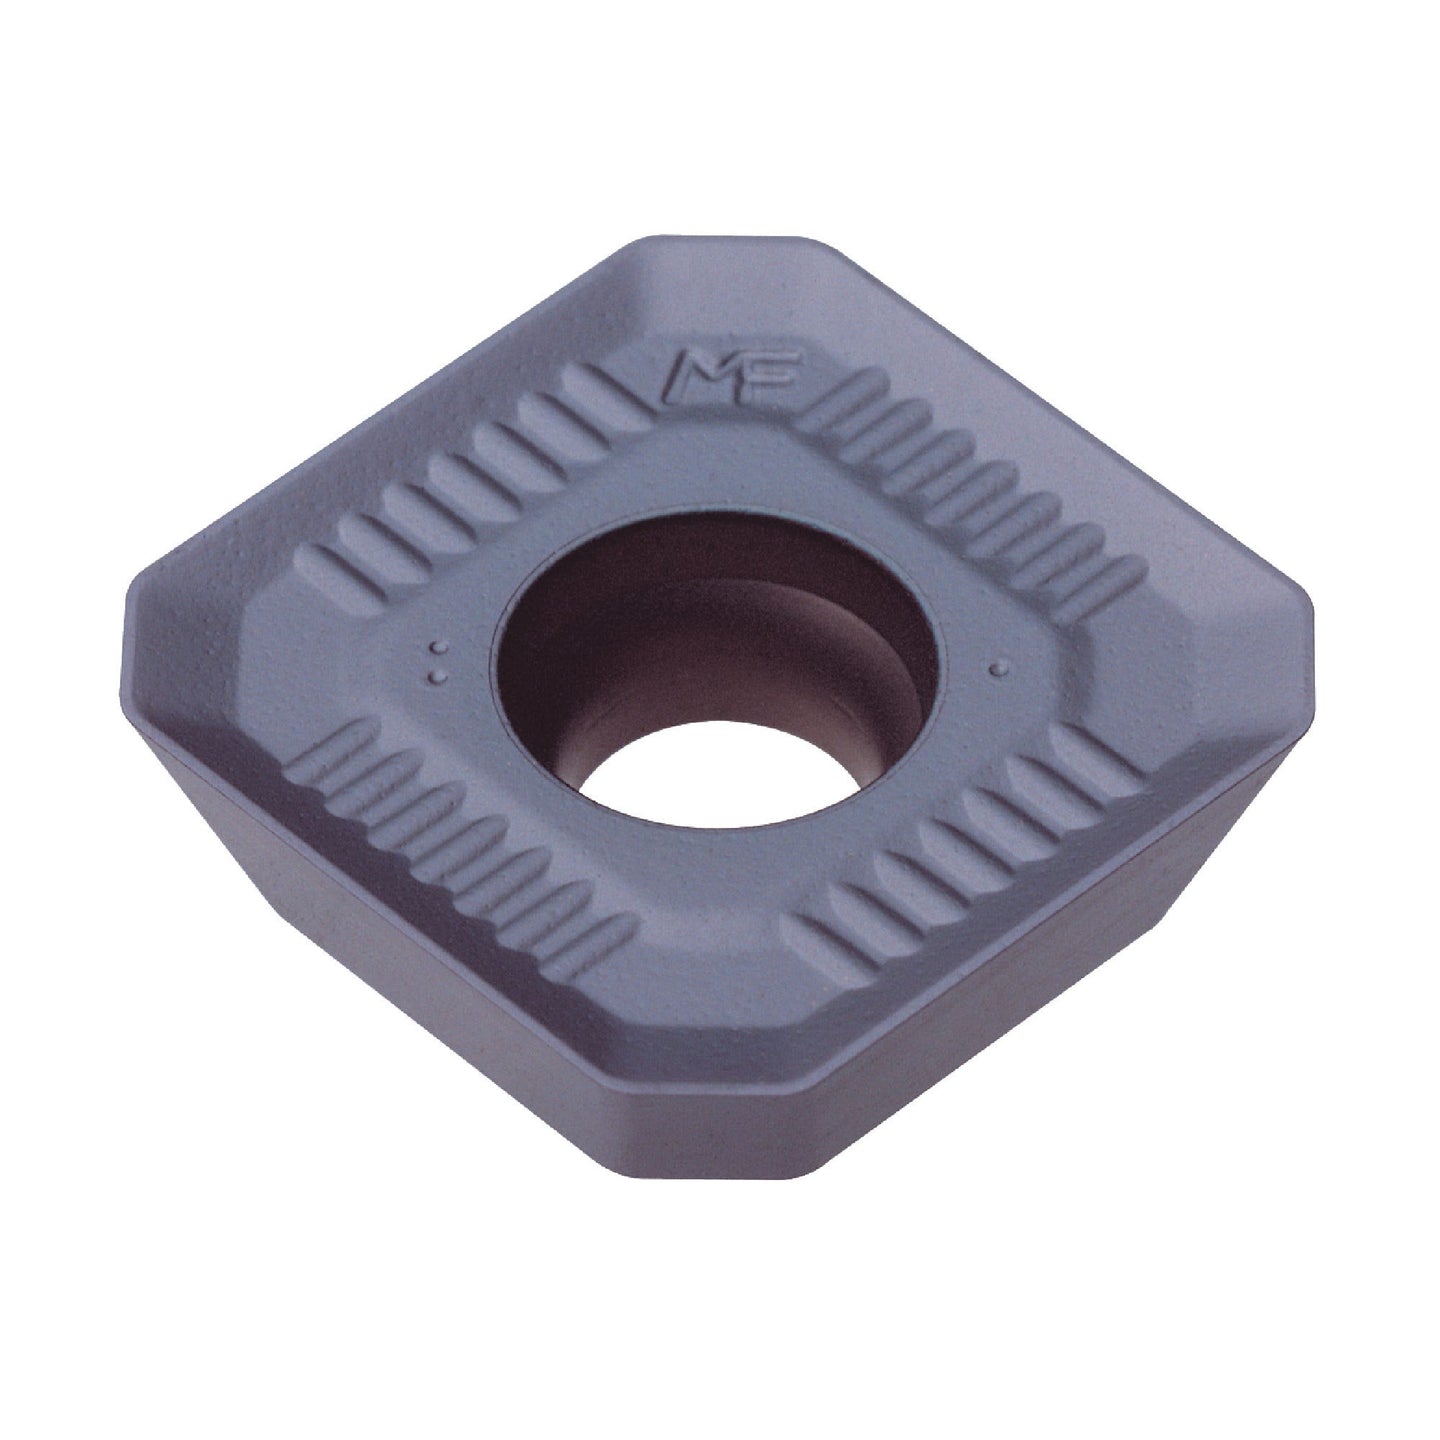 KORLOY-1-02-037107: SEXT14M4AGSN-MF PC5300, Square Milling Insert, 10-Pack